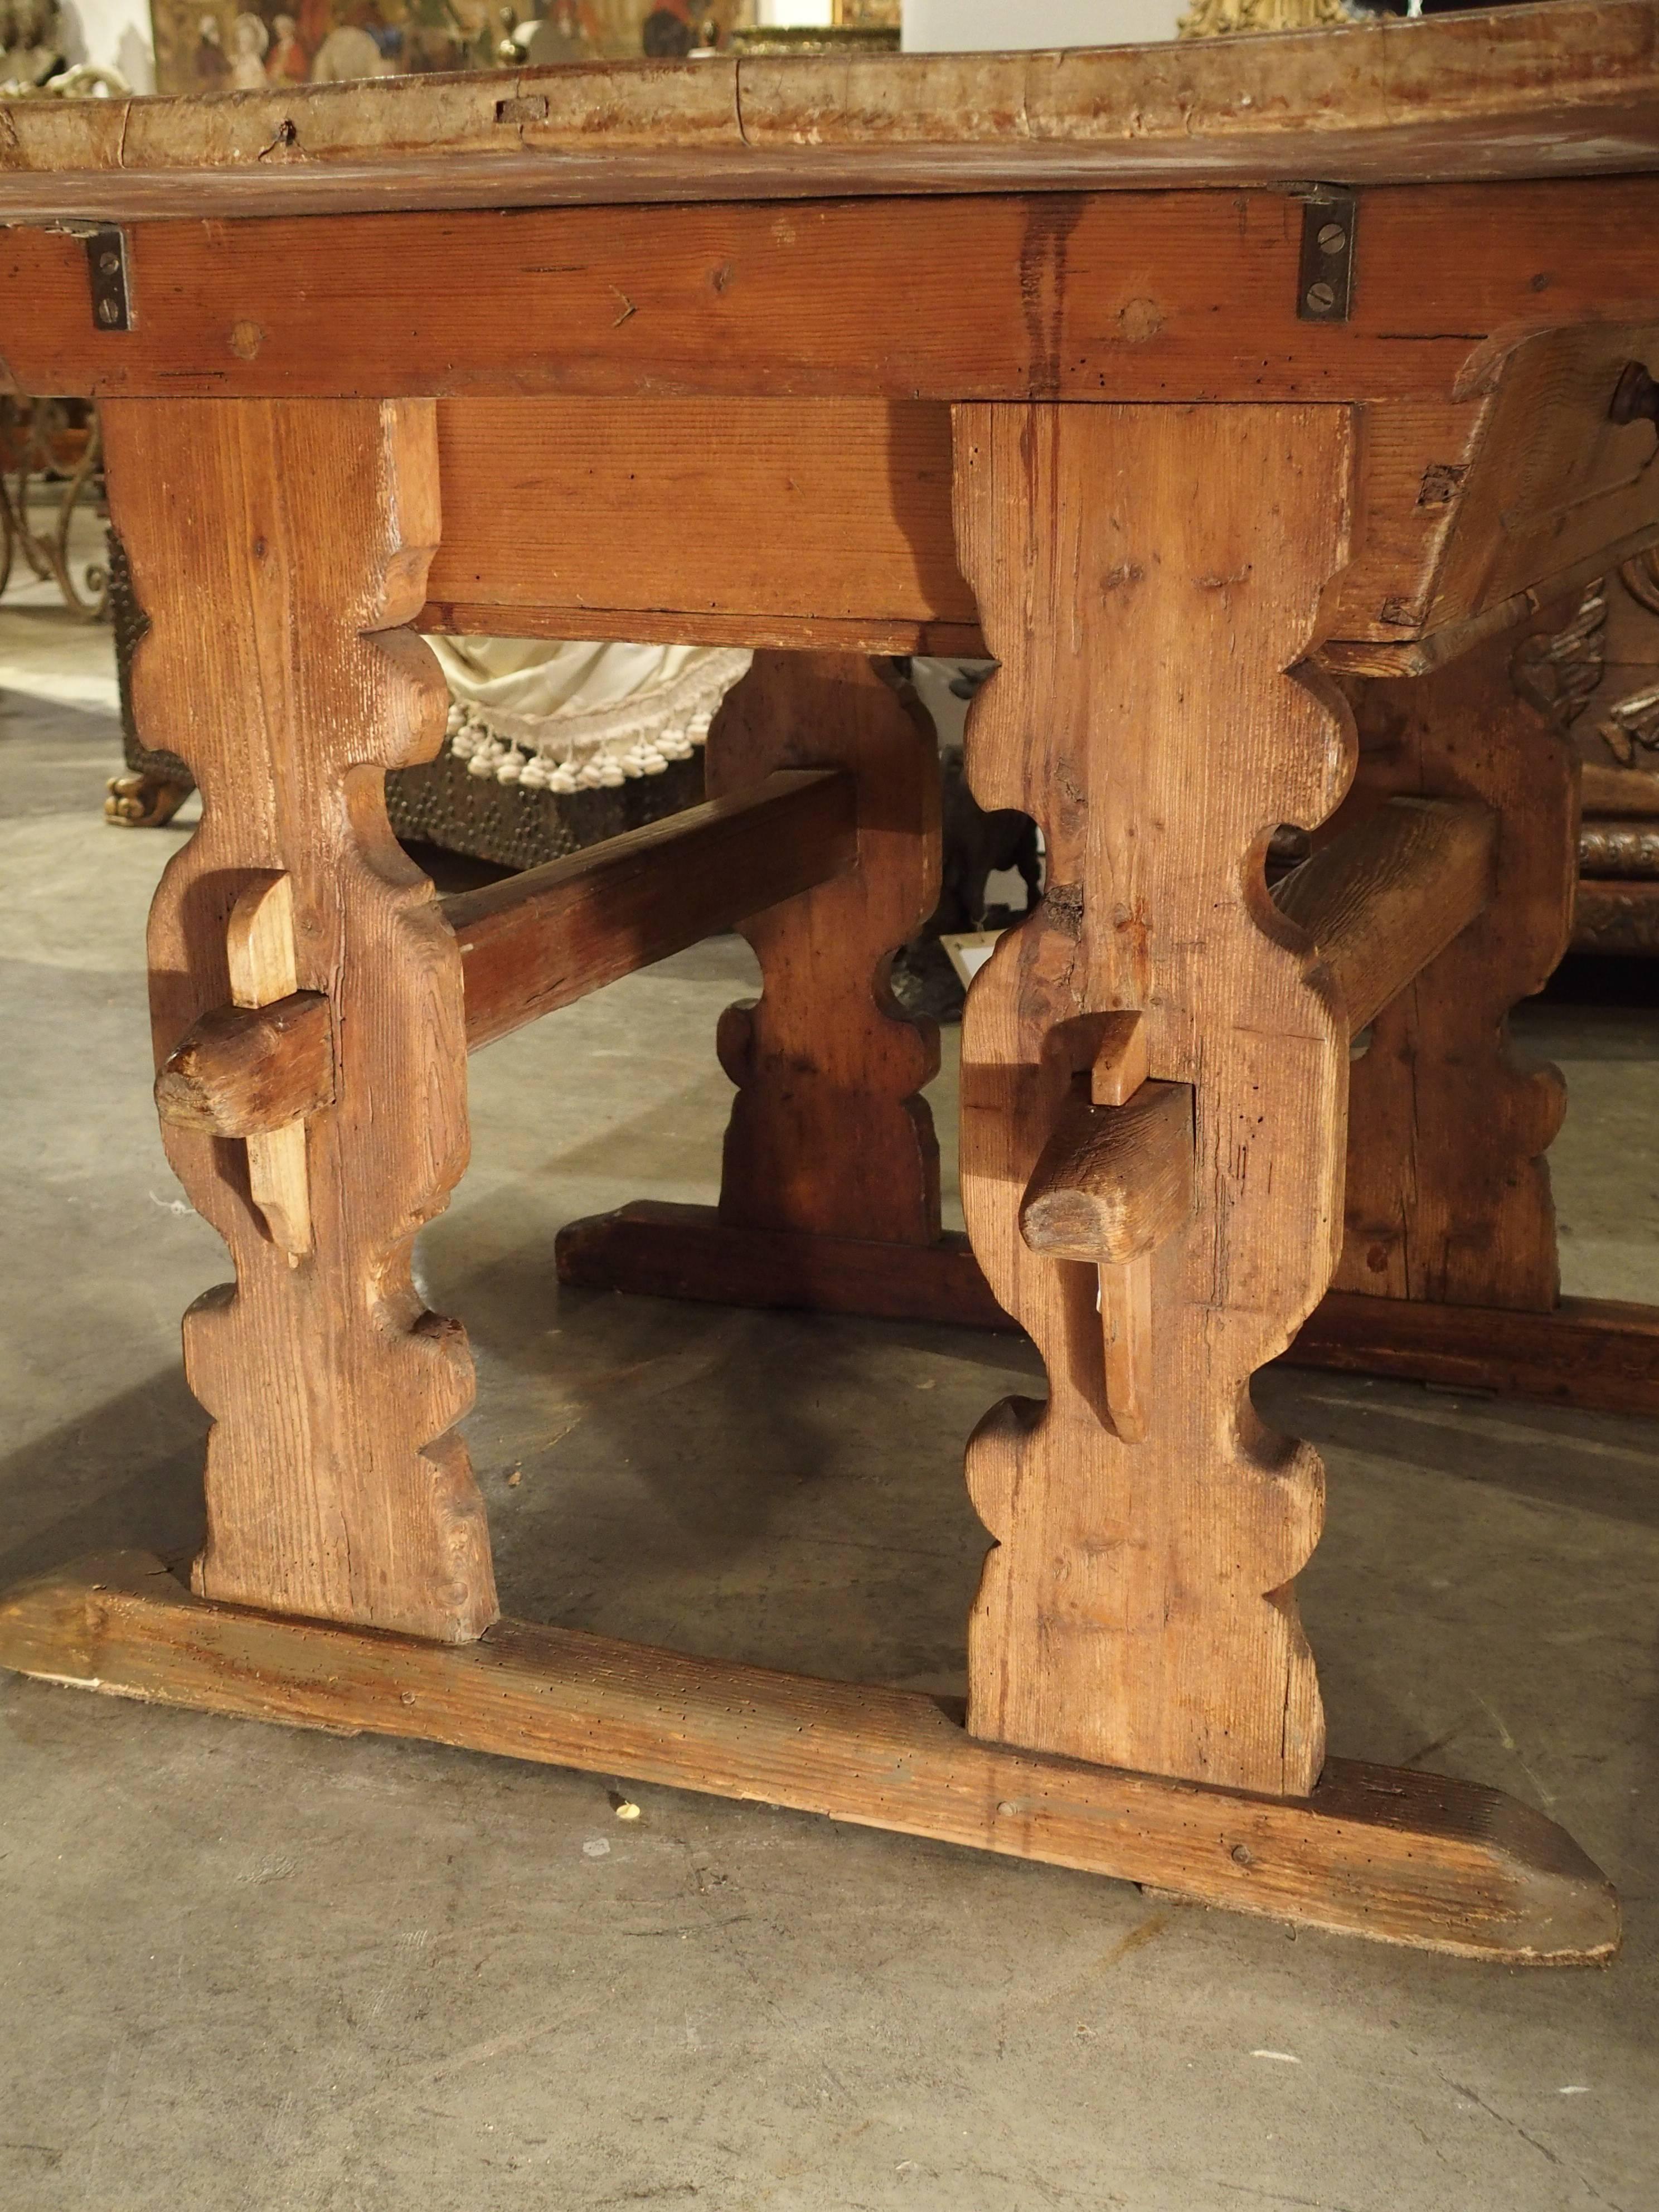 French Antique Chalet Table from the Mountain Regions of France, circa 1890